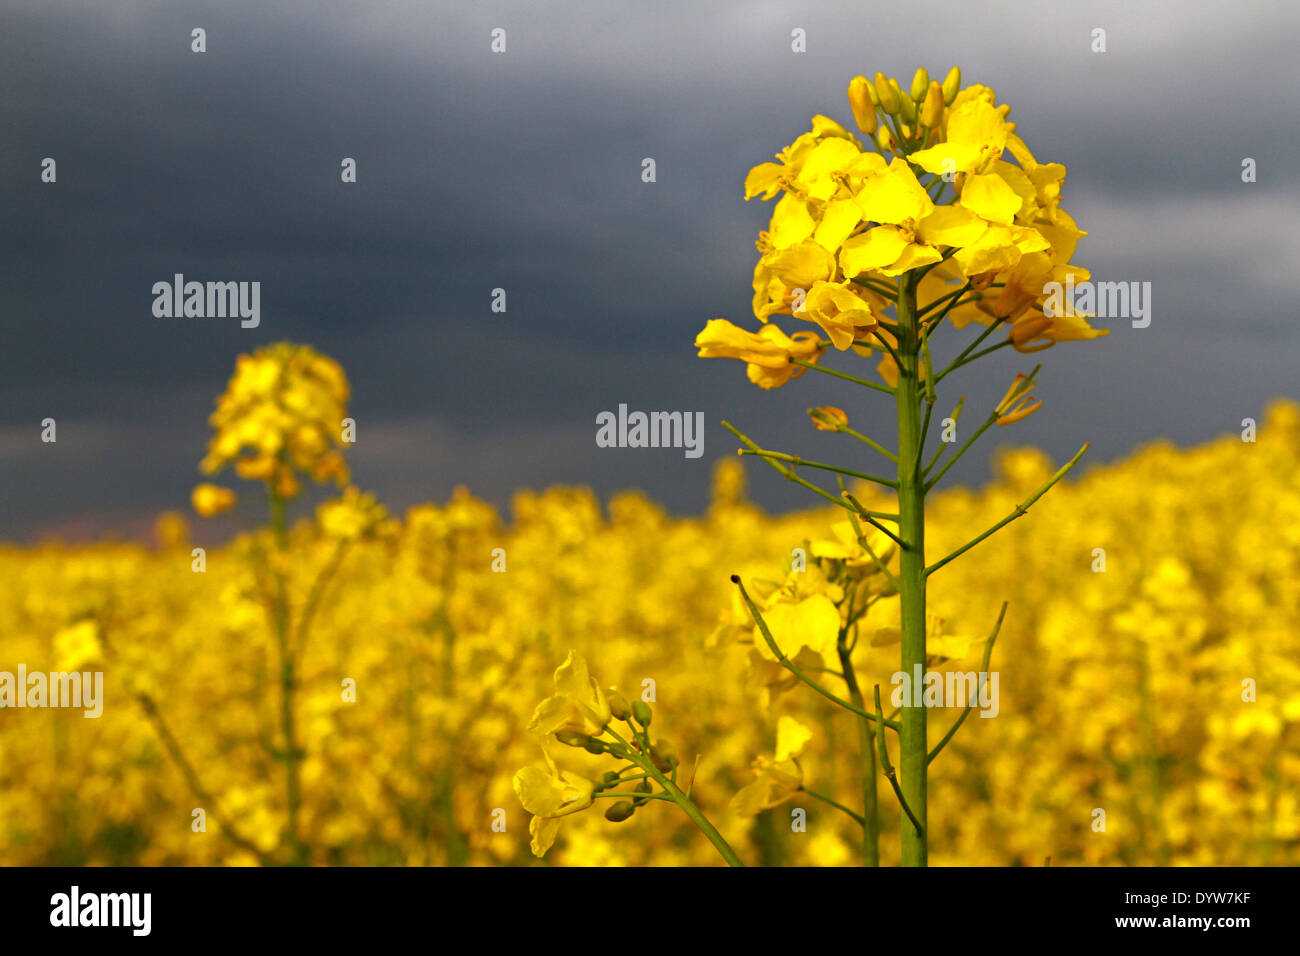 Dark clouds move across a flowering canola field near Stapelburg, Germany, 21 April 2014. Photo: Matthias Bein/dpa/lah - NO WIRE SERVICE Stock Photo